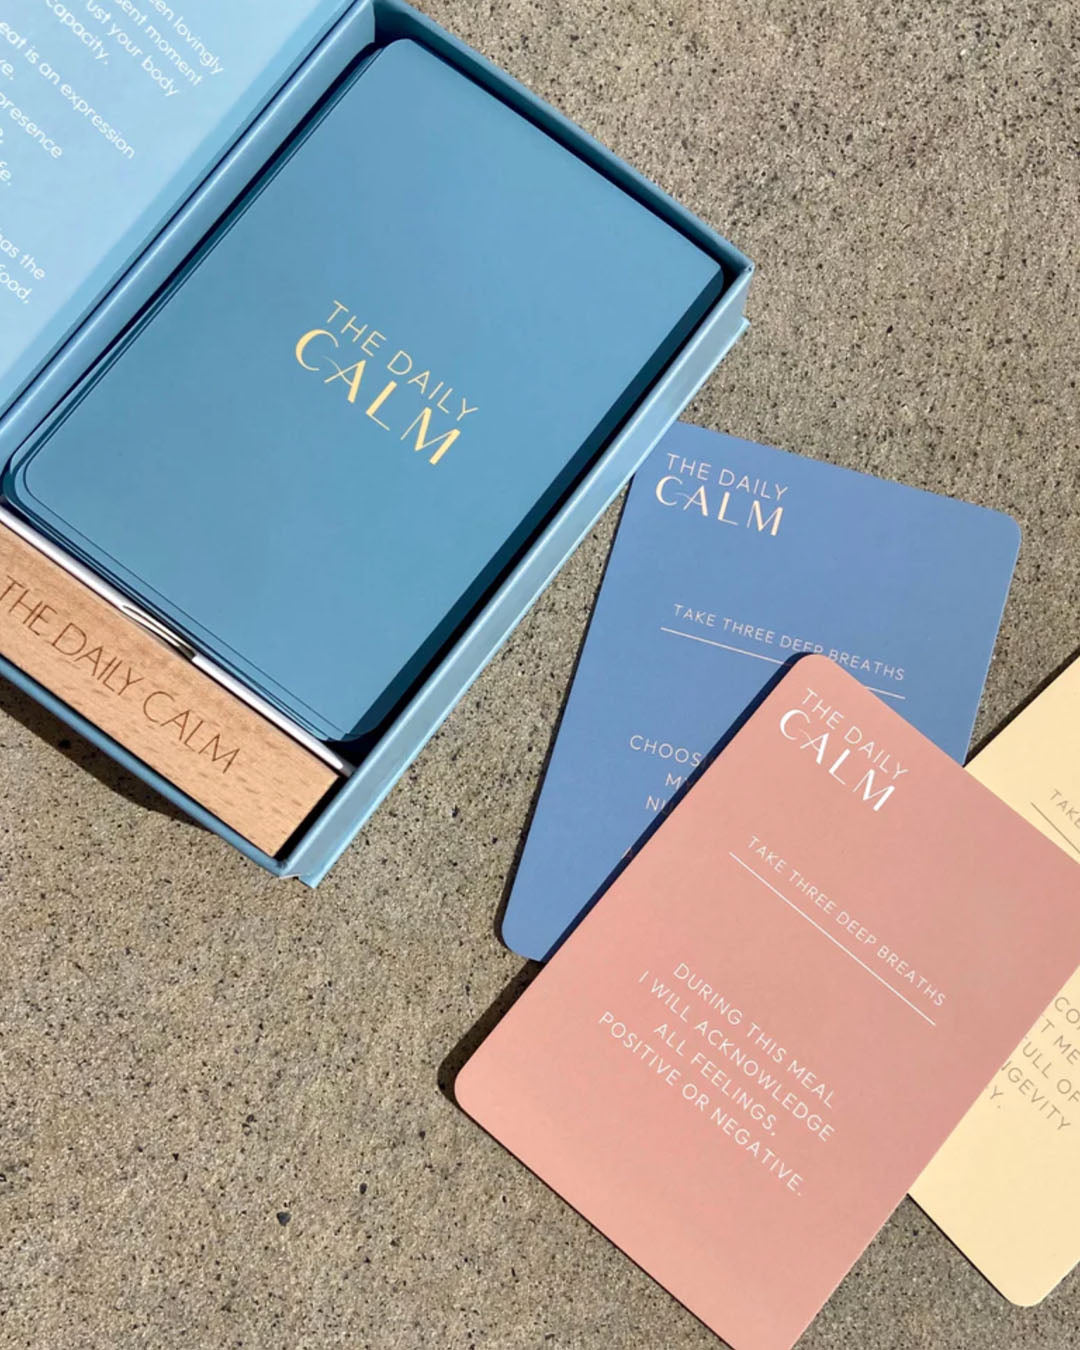 Mindful Eating Intentions - Deck One Books by The Daily Calm - Prae Store